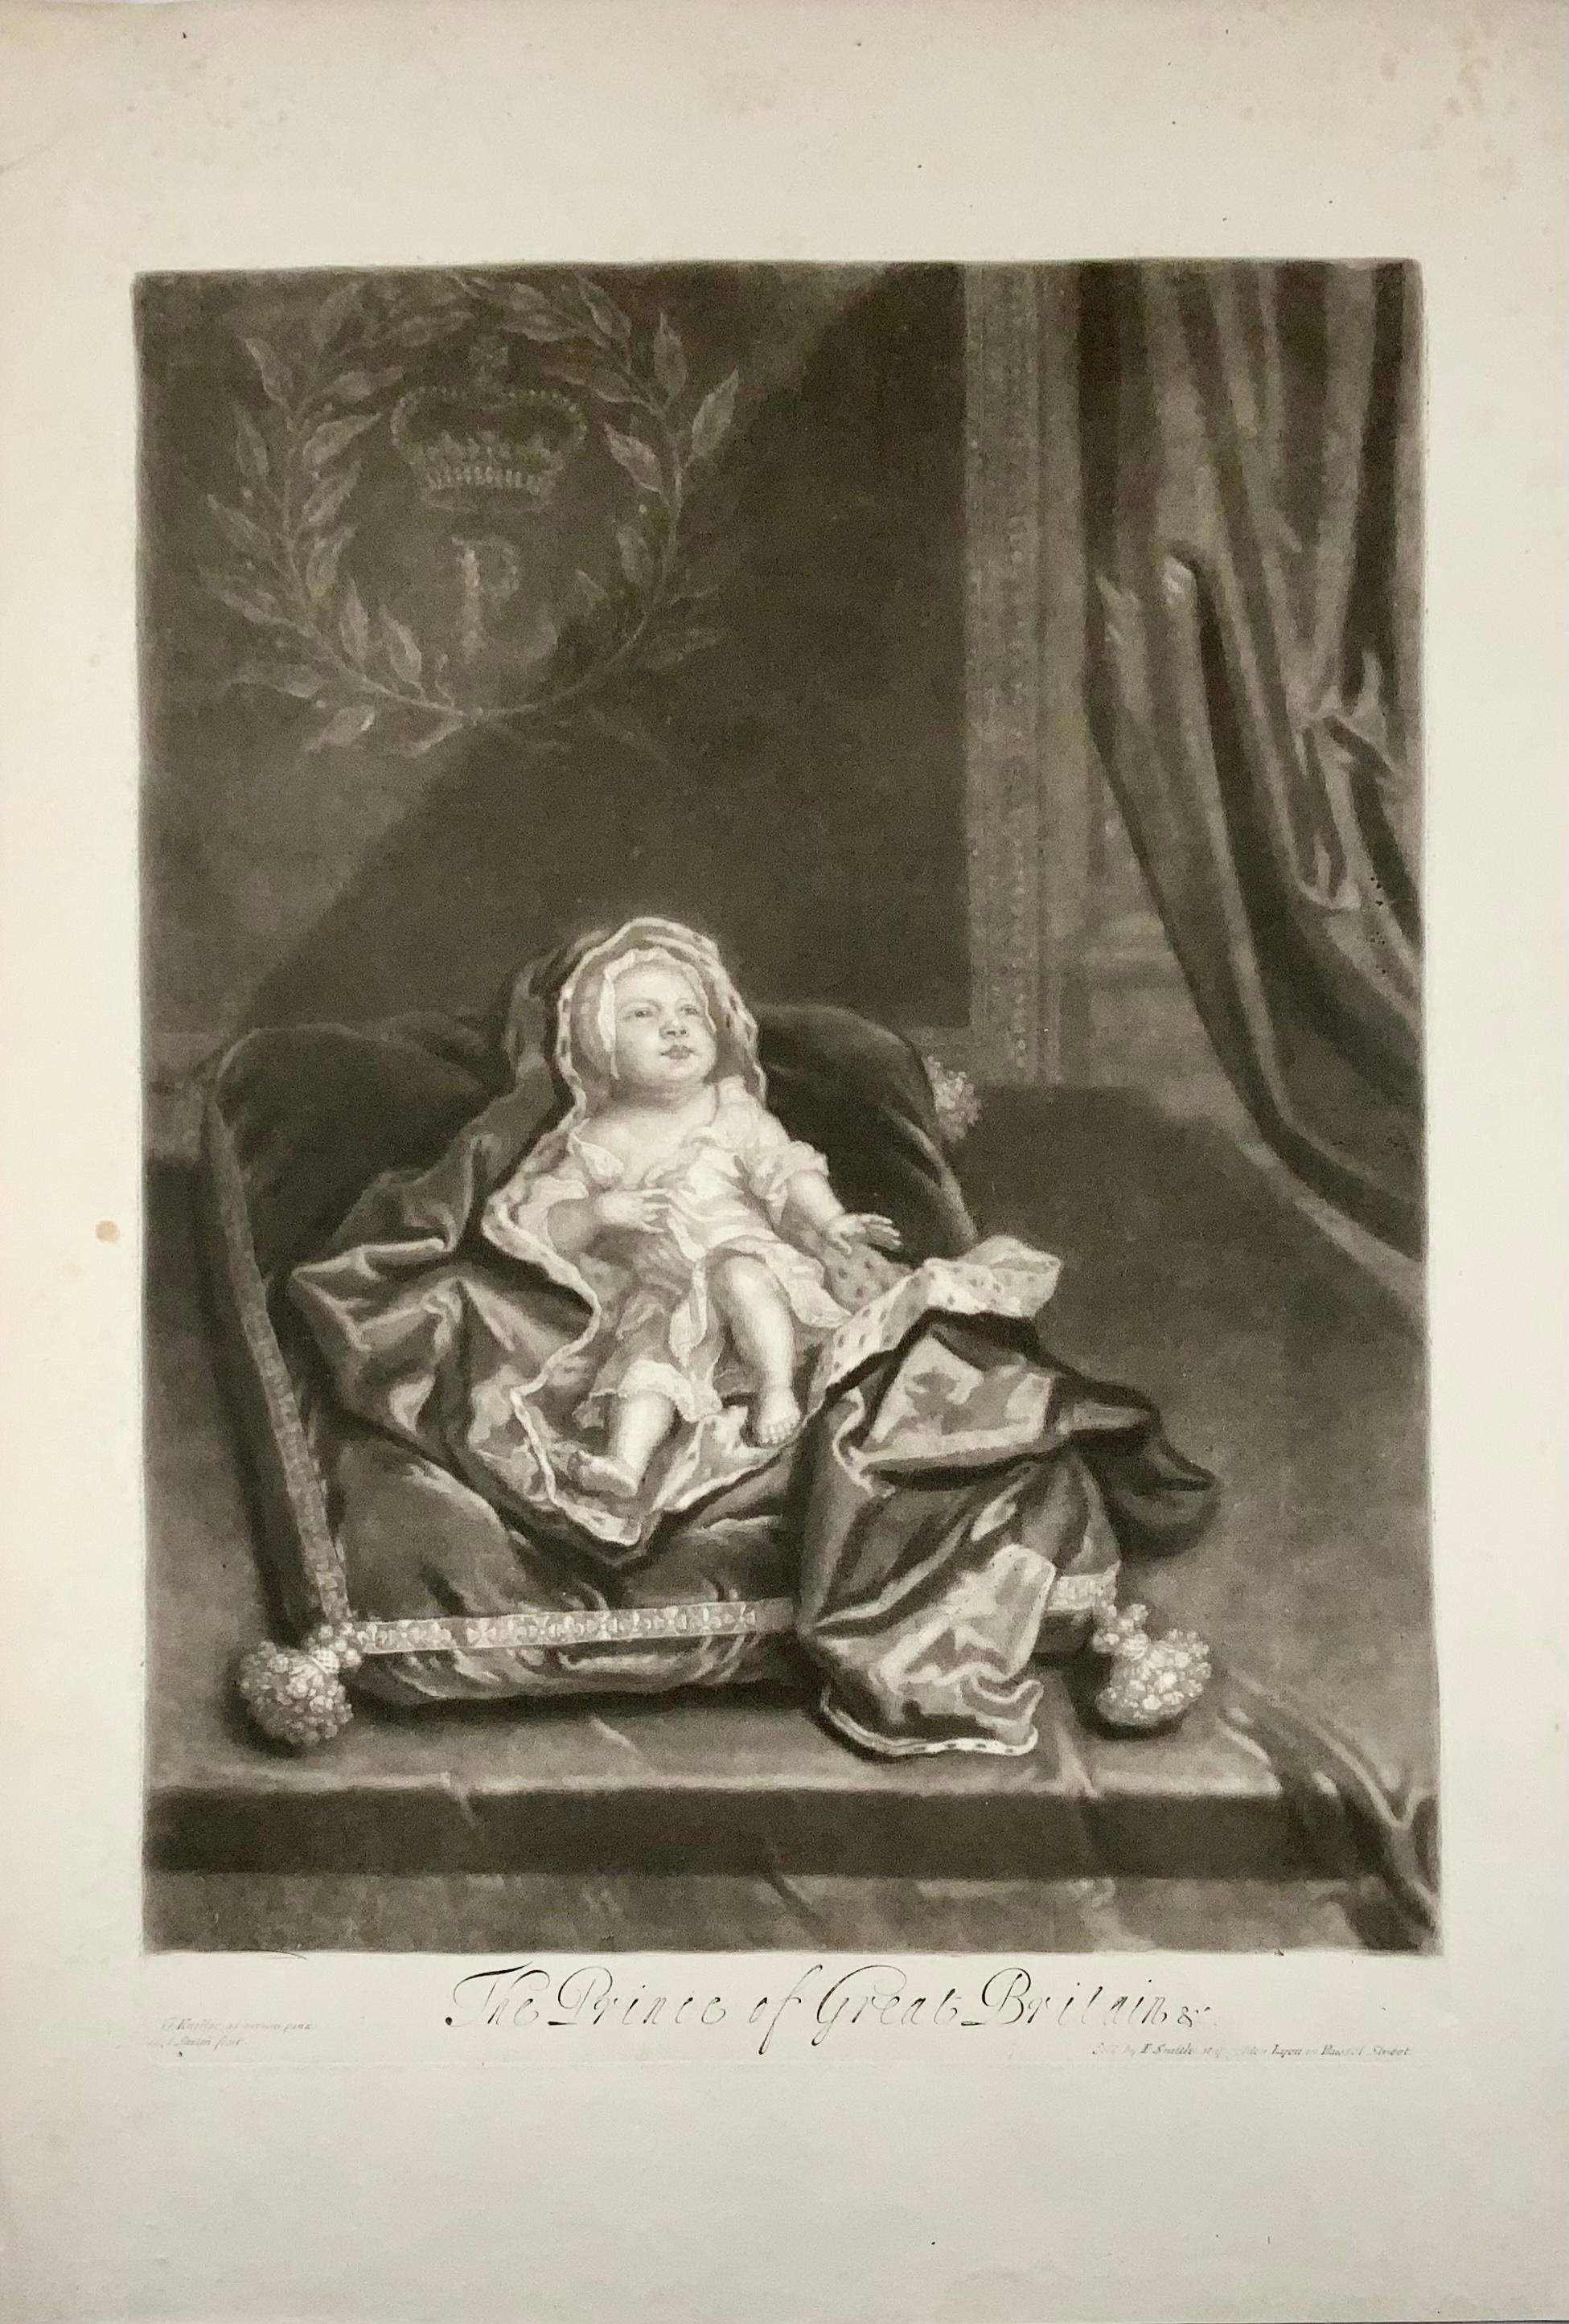 The Prince of Great Britain (Portrait of James Stuart, the Old Pretender)

G Kneller ad vivum pinx:', 'I Smith fecit'.

Published by I Smith at ye golden Lyon in Russel Street, published (c.1688).

Mezzotint with extensive rocker work.

47 x